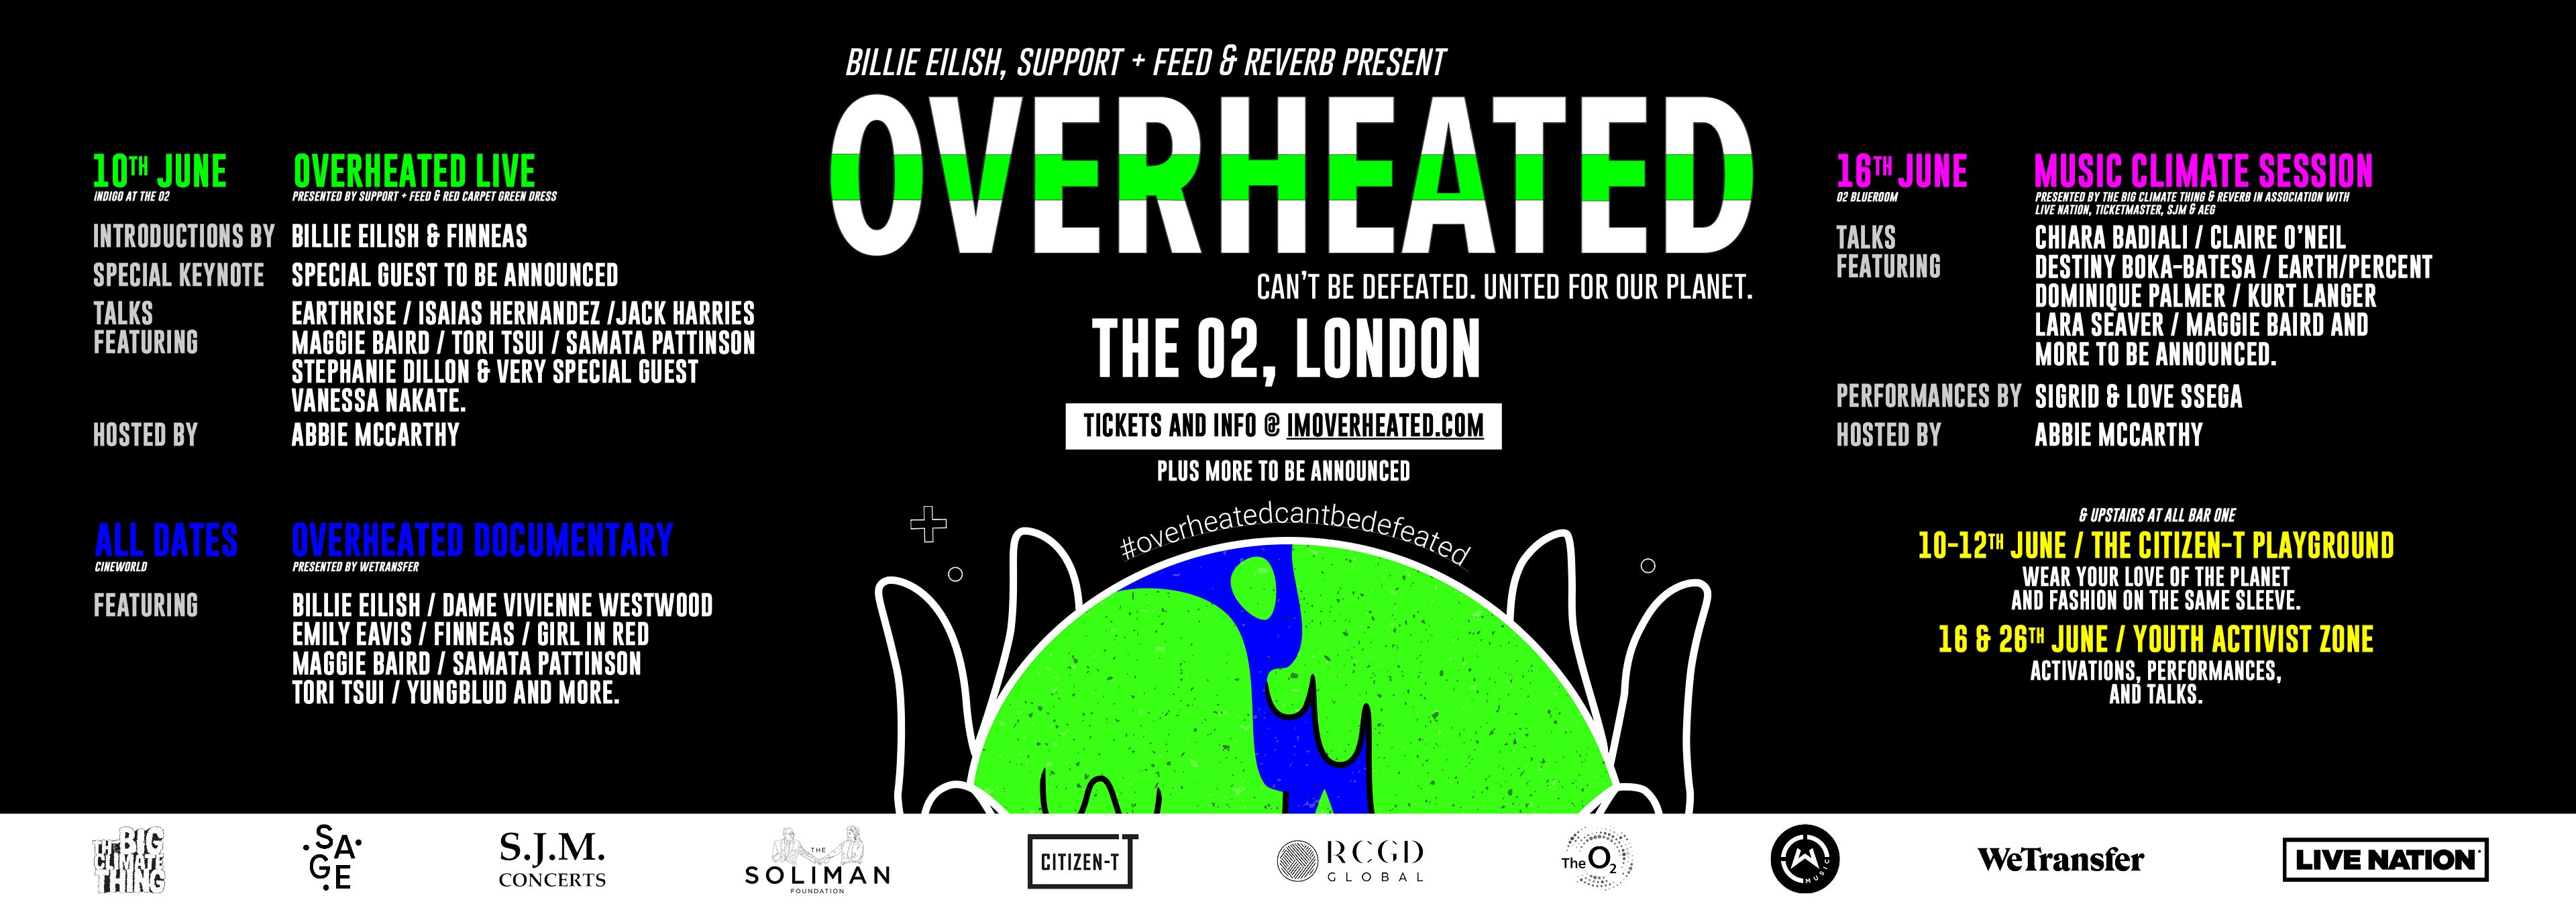 Overheated: Billie Eilish, Support + Feed & REVERB host first climate event takeover at The O2